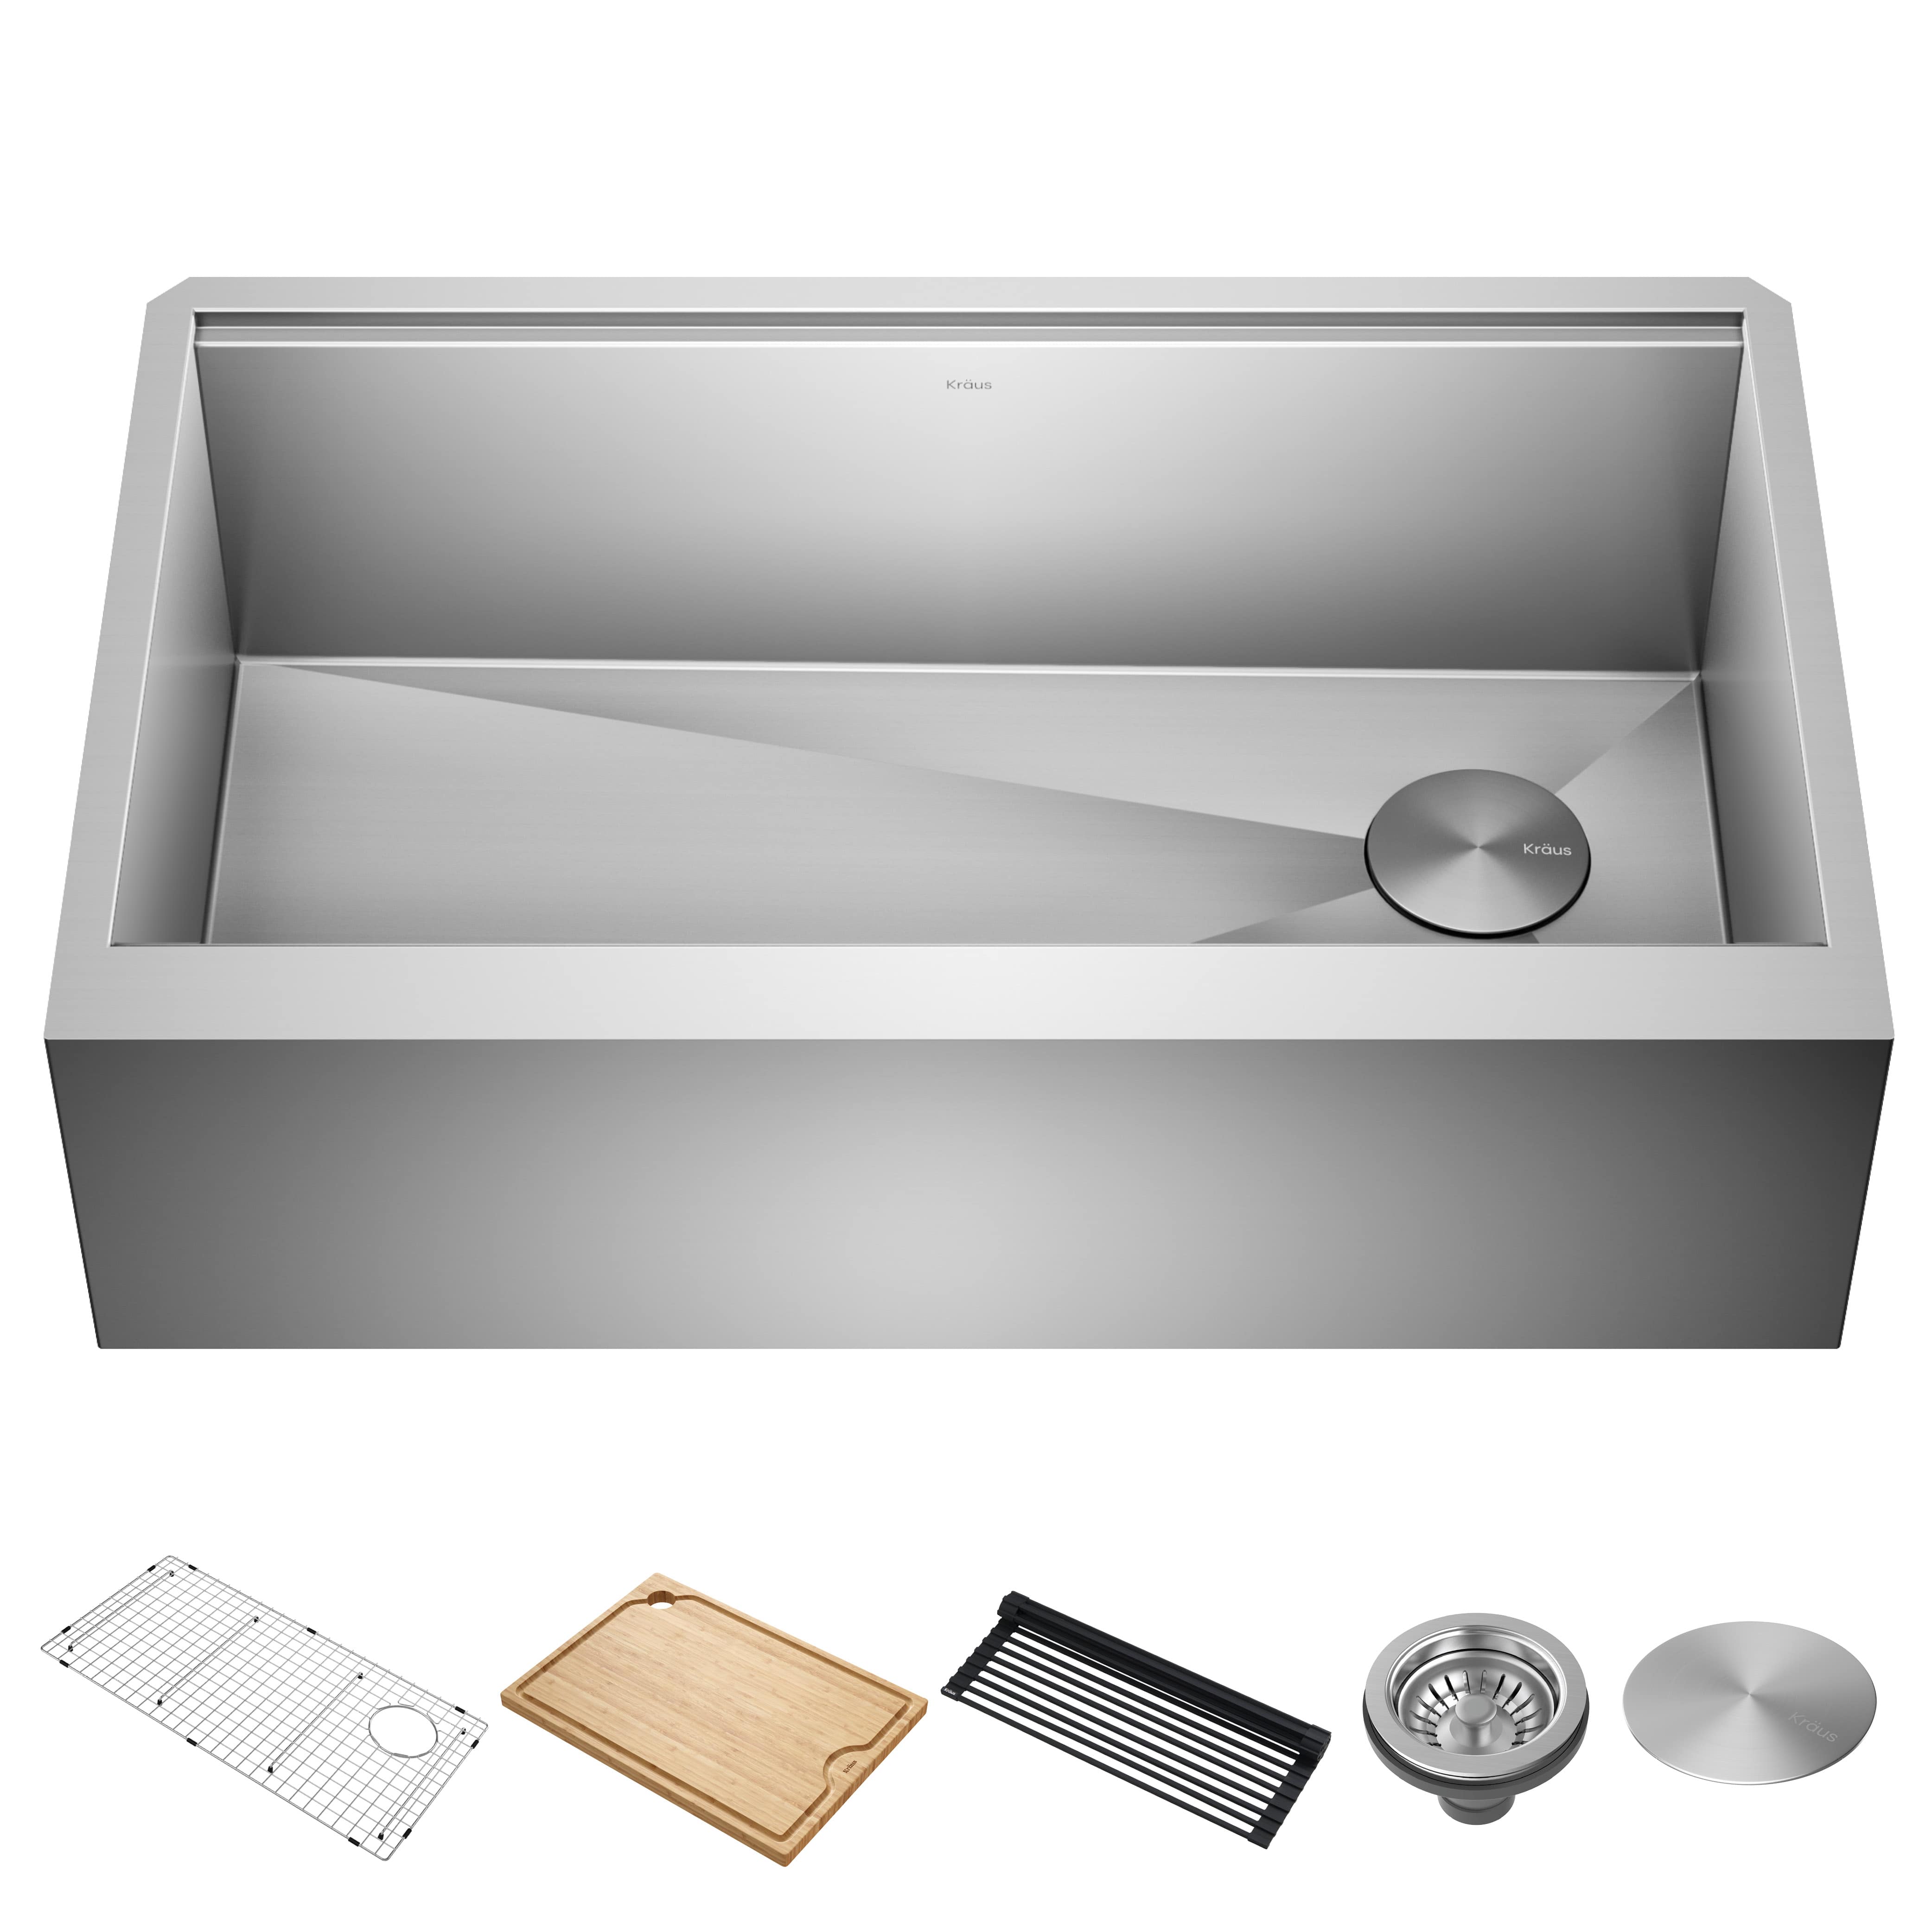 KRAUS Kore Workstation 33-inch Farmhouse Flat Apron Front 16 Gauge Single Bowl Stainless Steel Kitchen Sink with Accessories (Pack of 5) - image 1 of 16